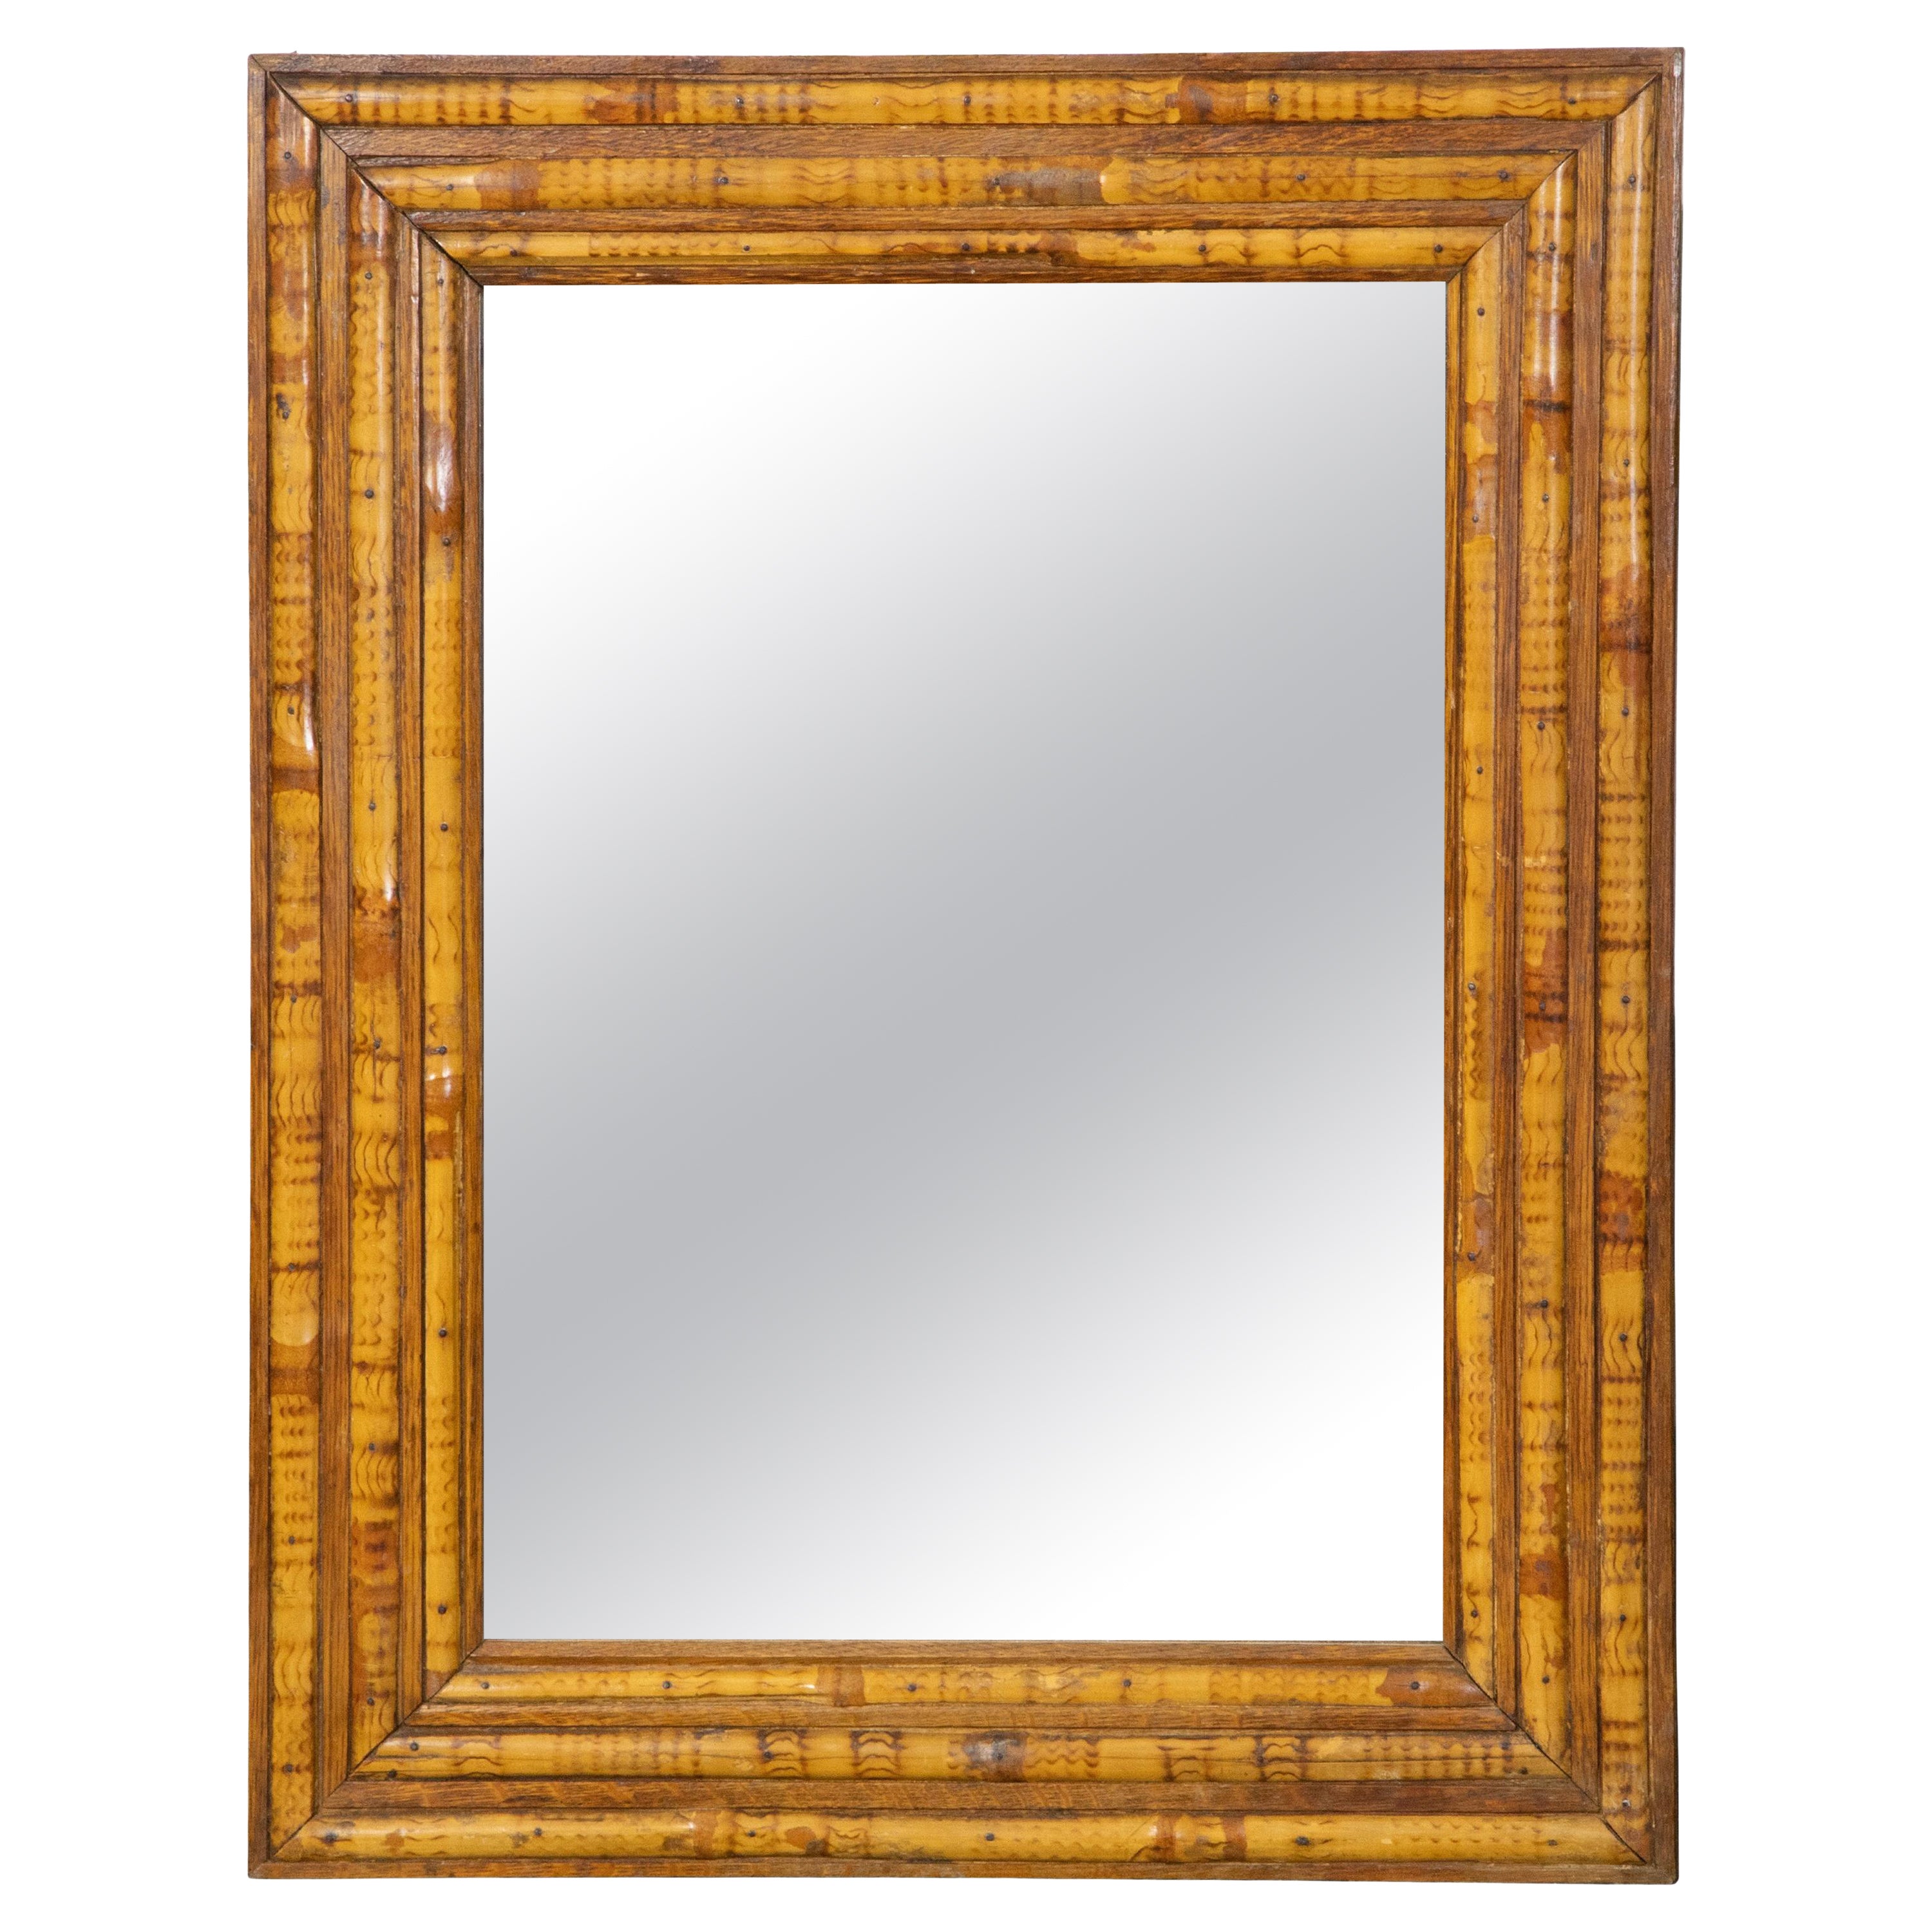 English Midcentury Bamboo and Wood Wall Mirror with Alternating Design For Sale